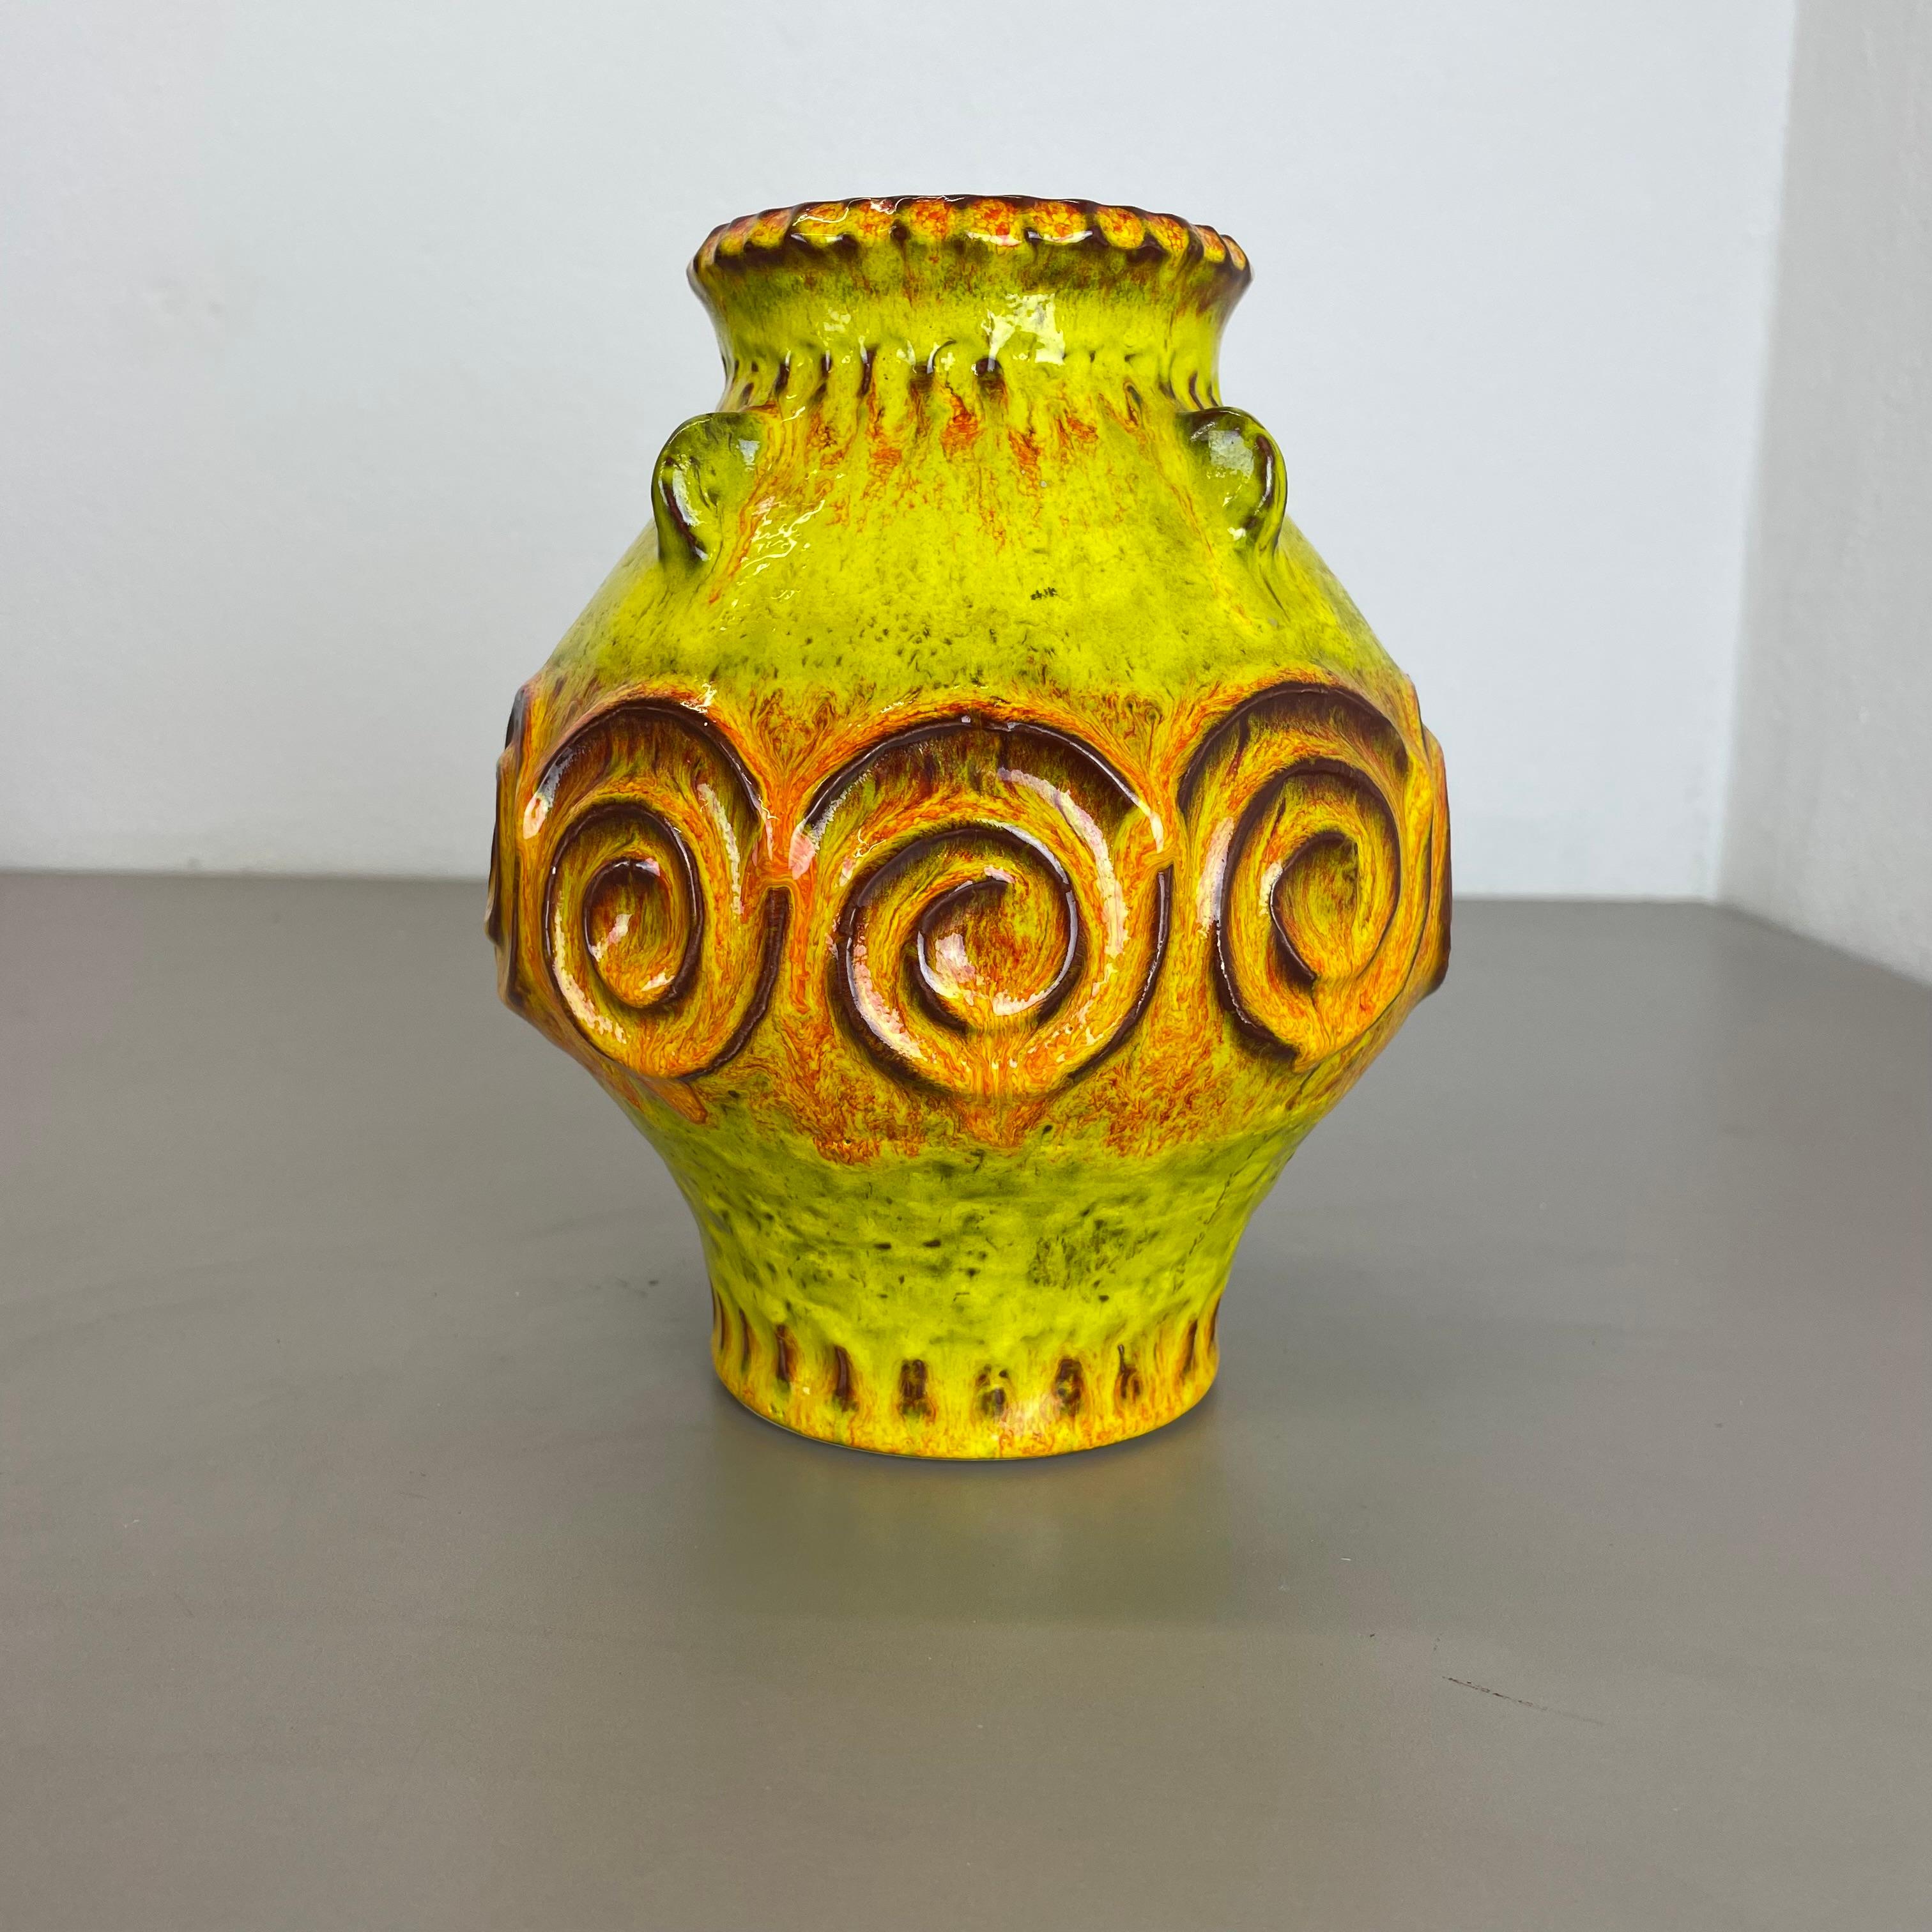 Article:

Pottery ceramic vase


Producer:

JASBA Ceramic, Germany



Decade:

1970s




Original vintage 1970s pottery ceramic vase made in Germany. High quality German production with a nice abstract illustration in yellow and orange. The vase was